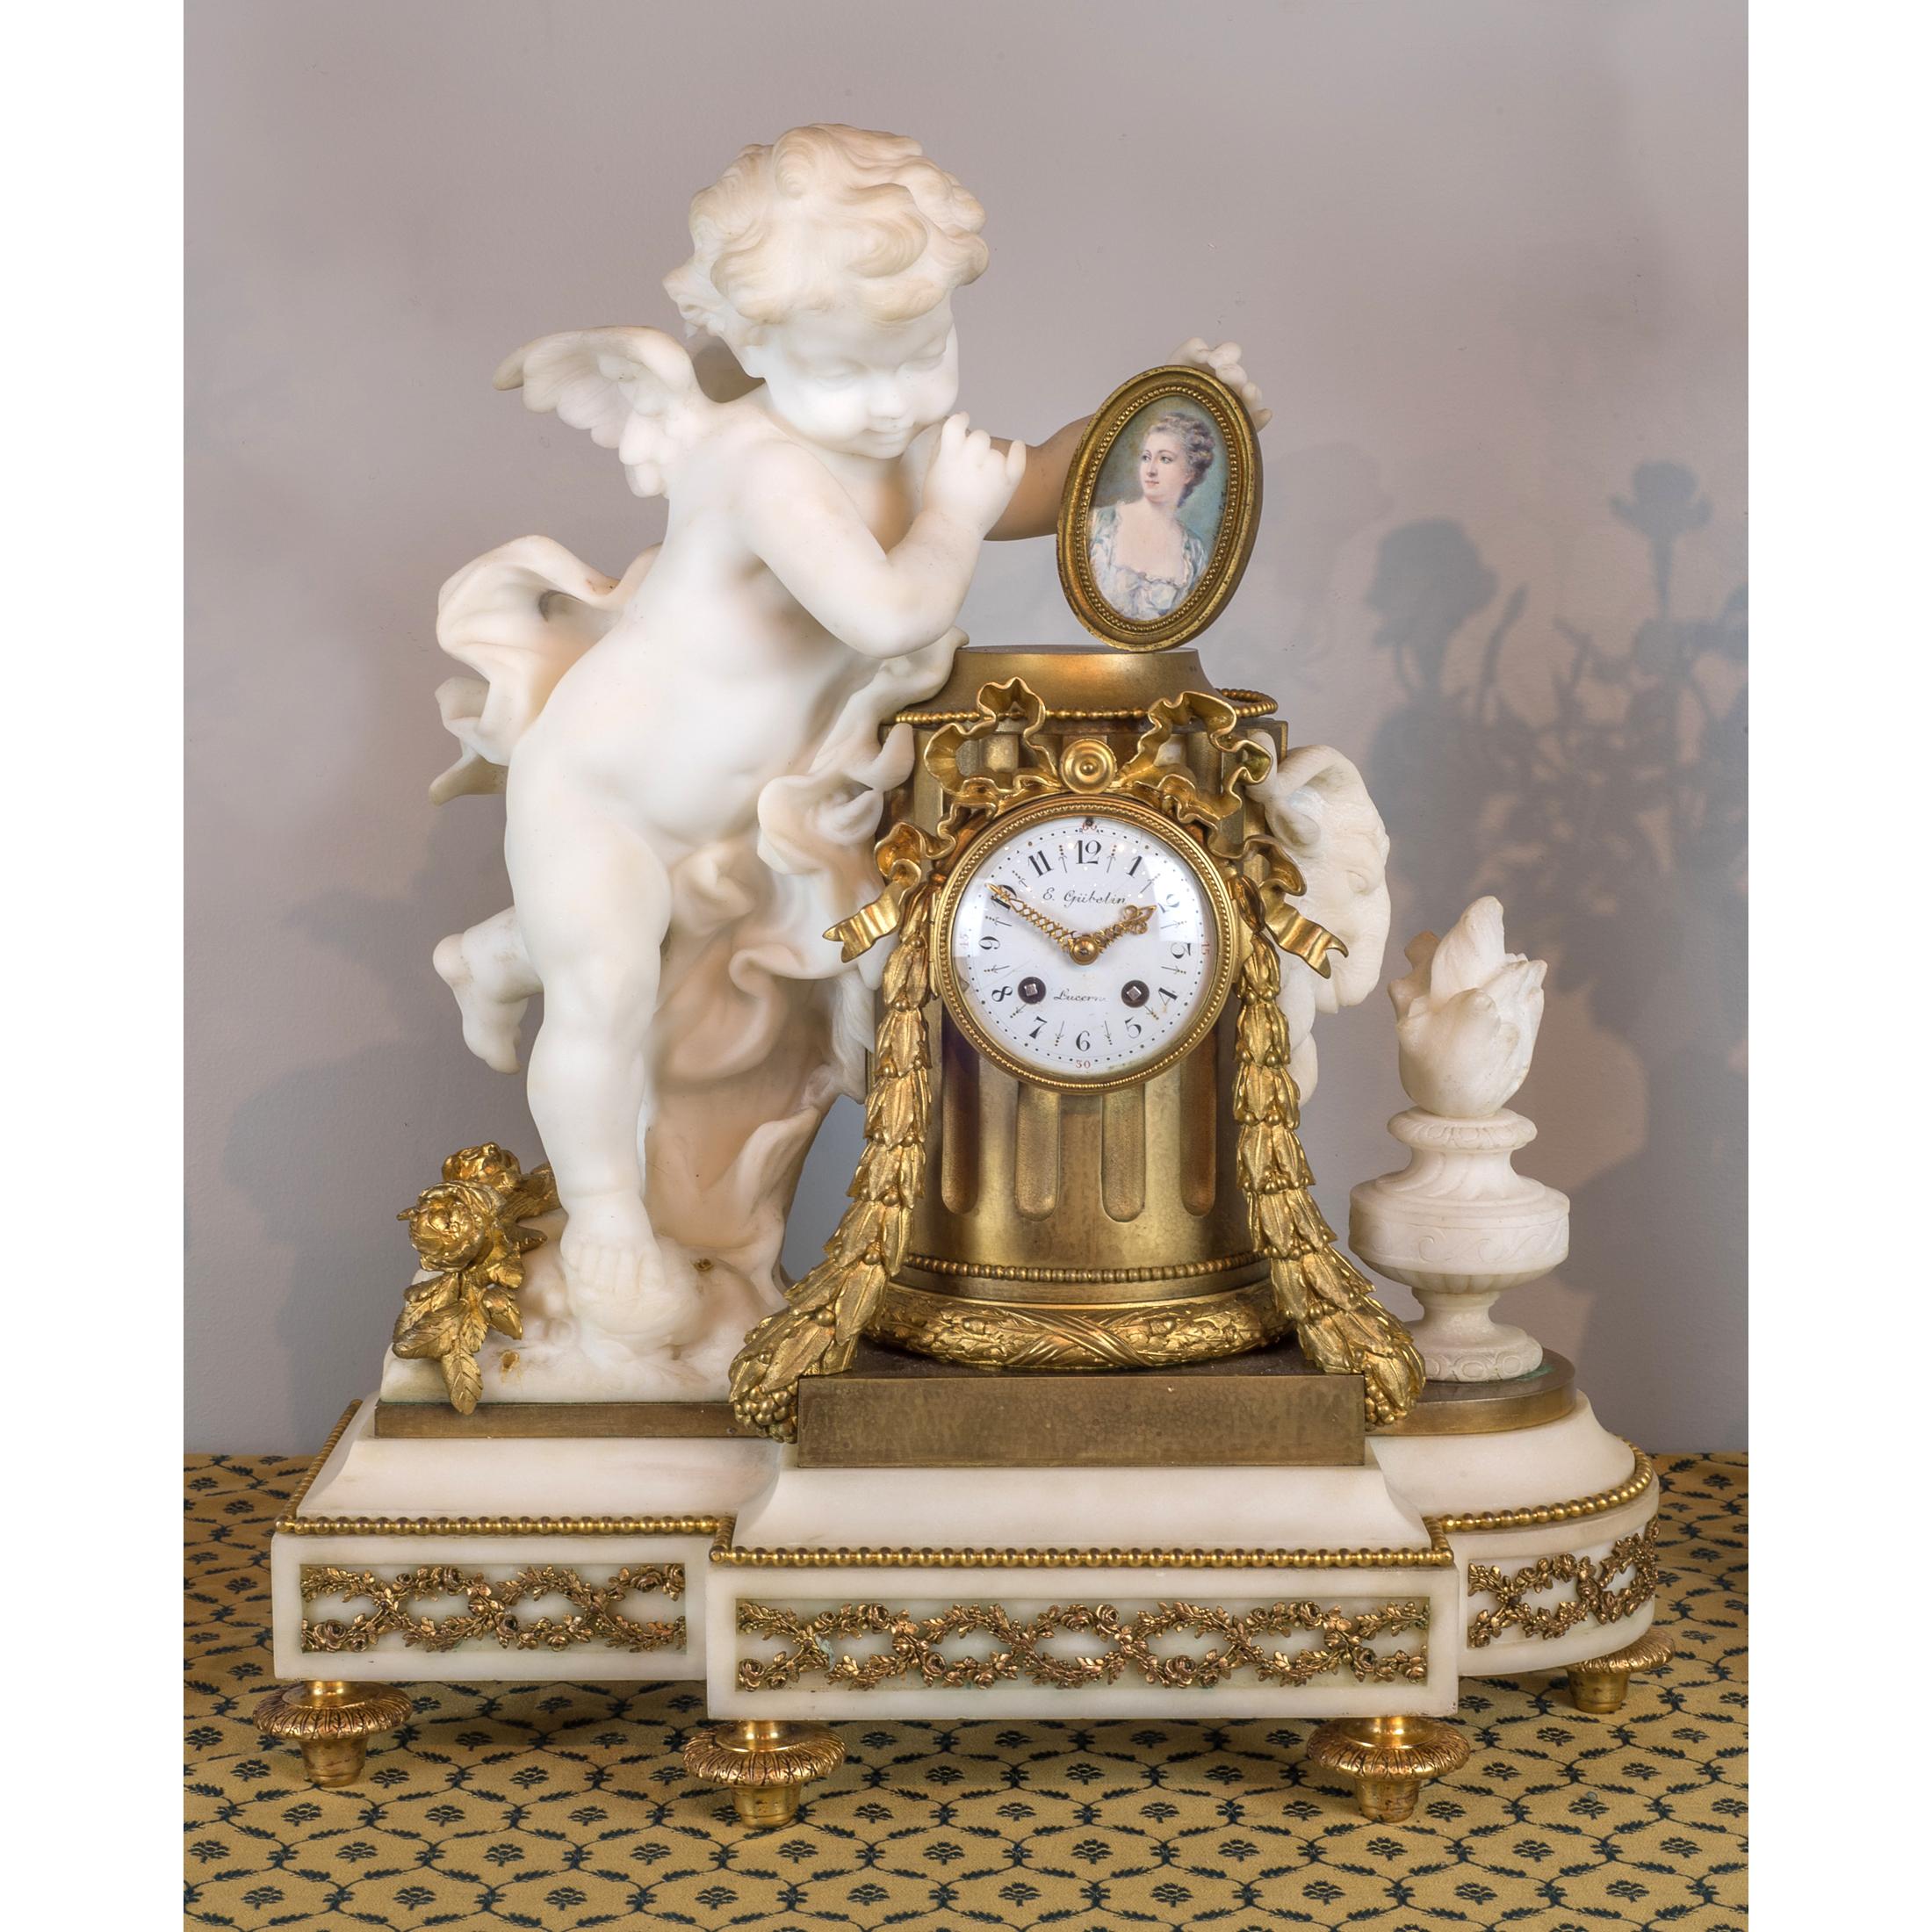 Signed E. GUBELIN, LUCERNE
Date: 19th century
Origin: French
Dimension: Clock: 20 in. x 18 1/2 in.; Candelabras: 22 1/2 inches high.